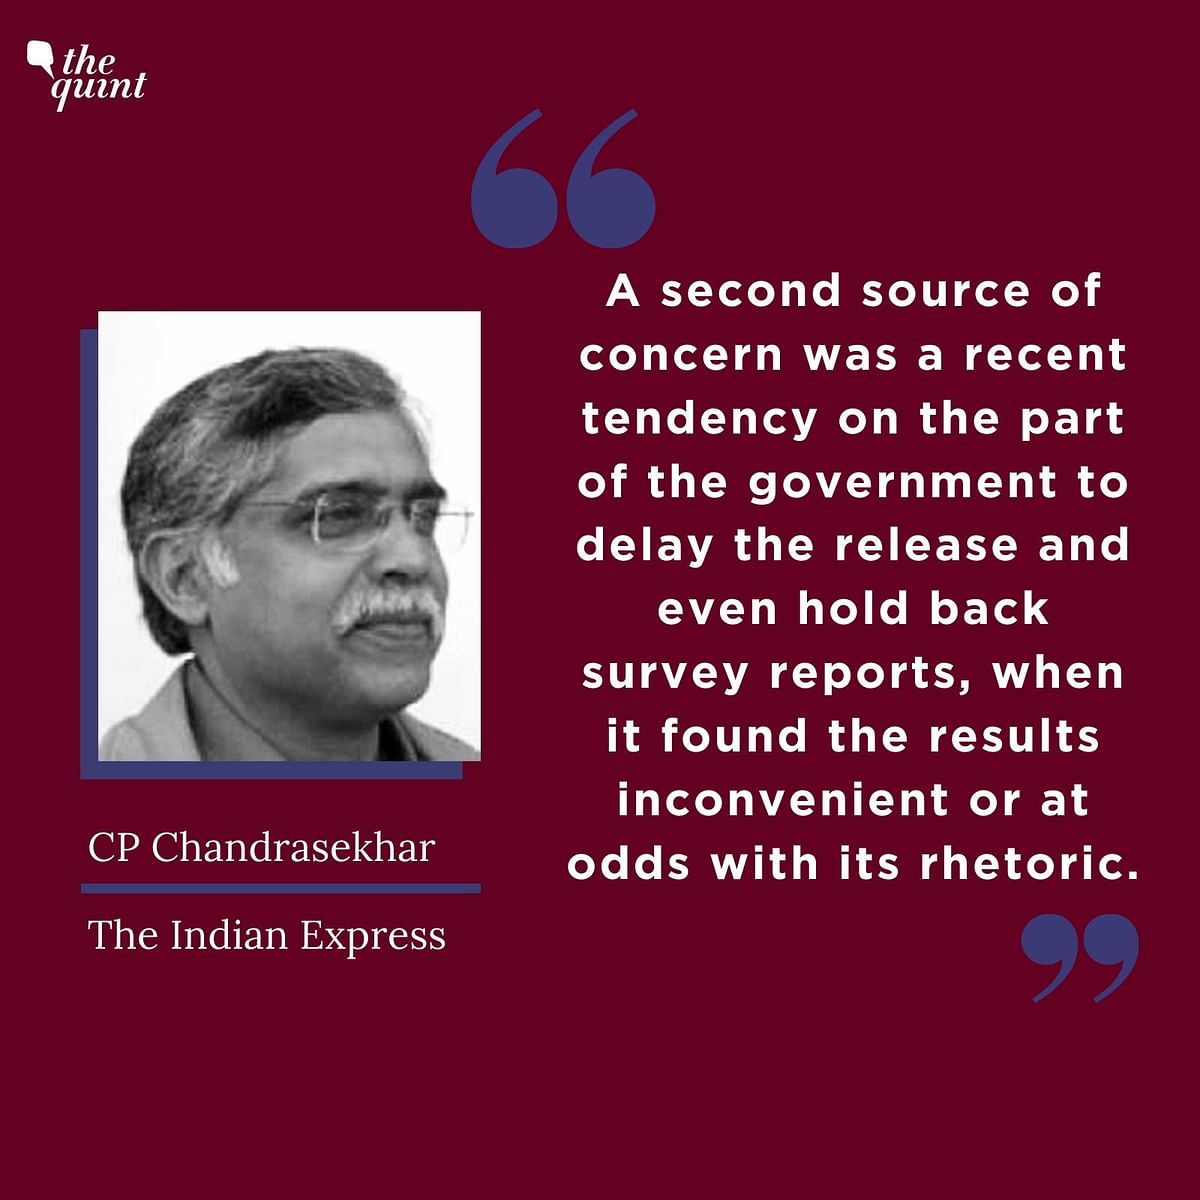  CP Chandrasekhar withdrew from the  Standing Committee on Economic Statistics on Monday, a day after JNU violence.